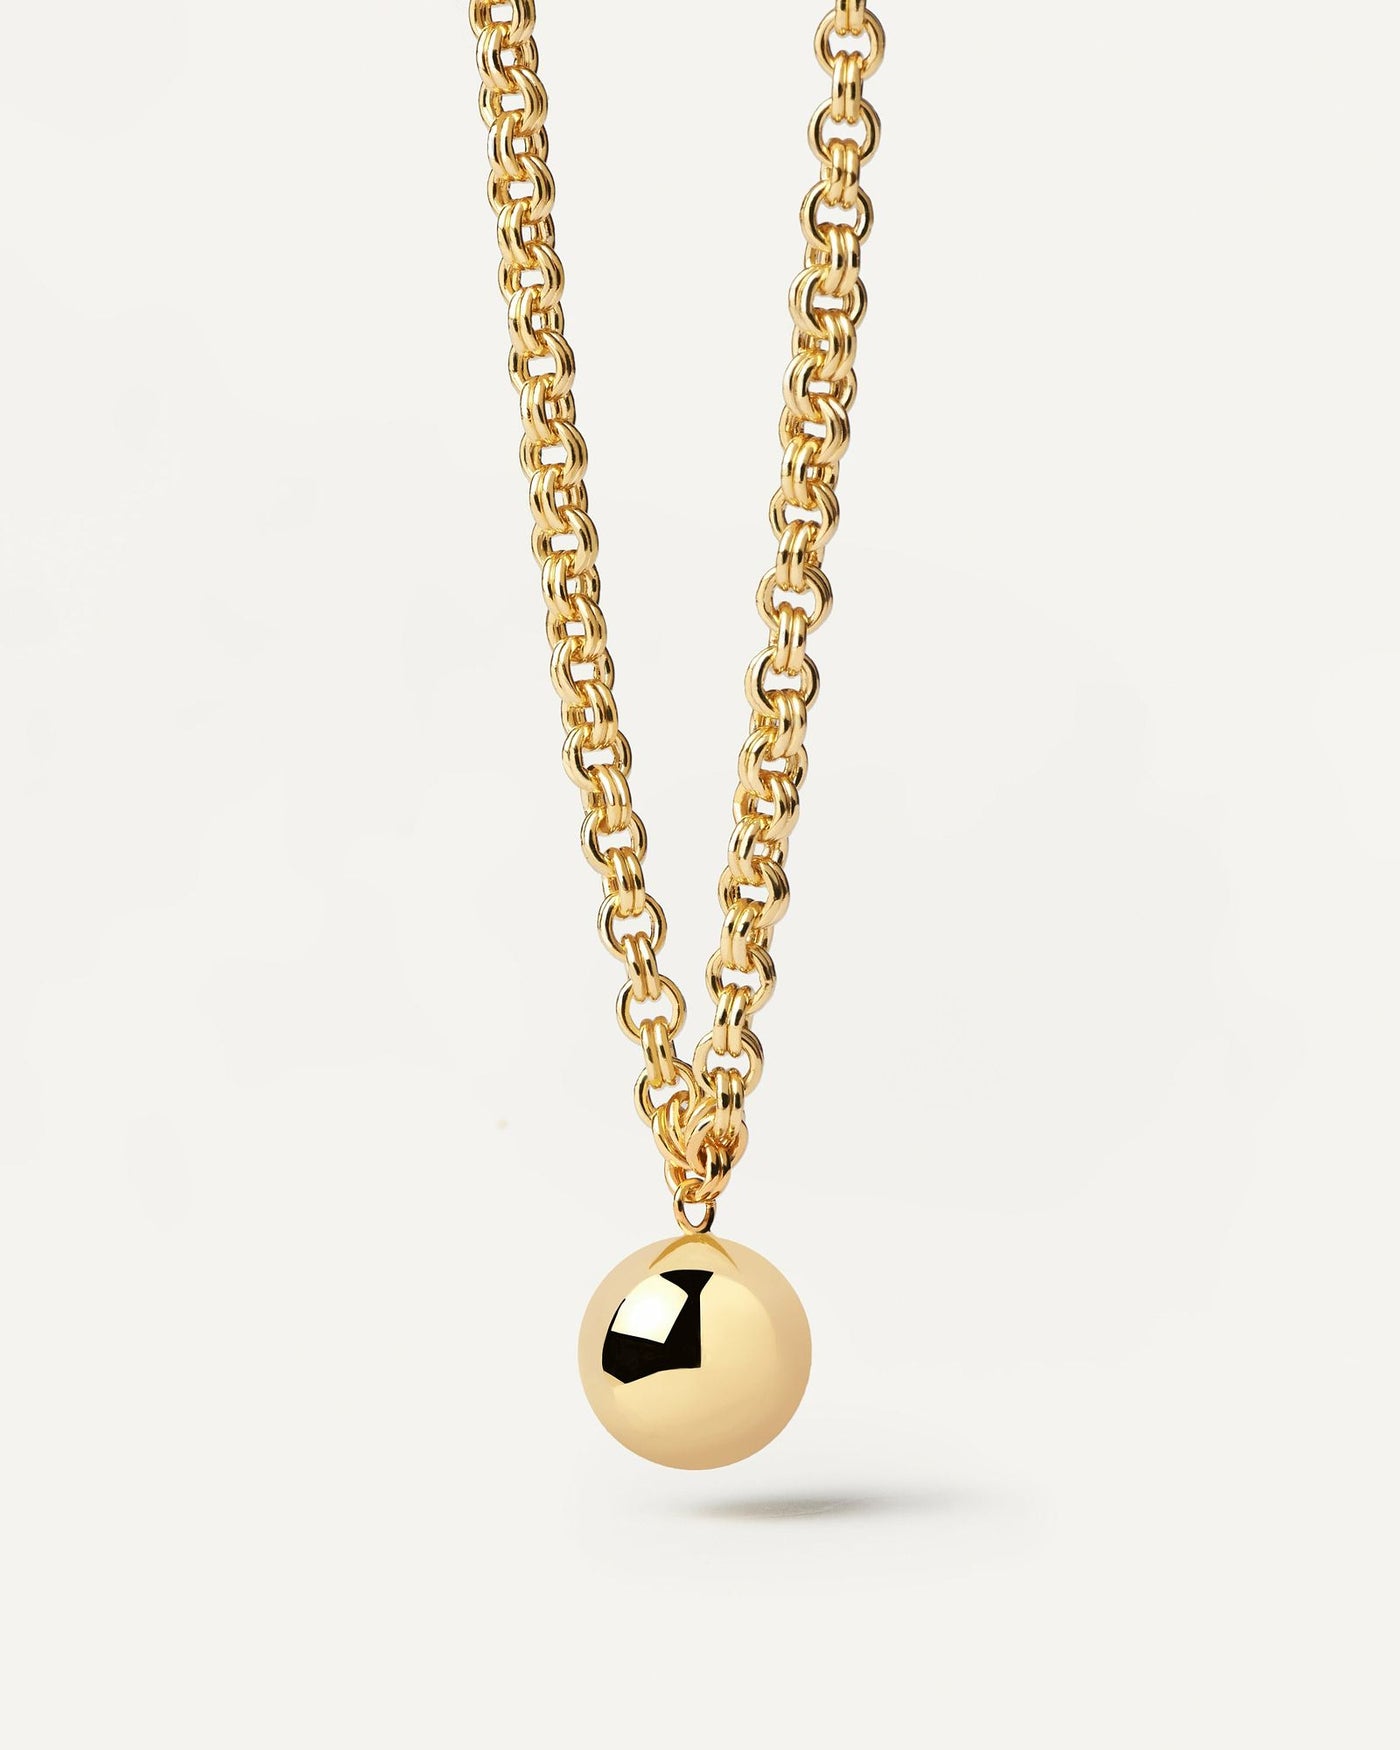 2024 Selection | Super Future Necklace. Gold-plated silver chain necklace with a hanging ball pendant. Get the latest arrival from PDPAOLA. Place your order safely and get this Best Seller. Free Shipping.